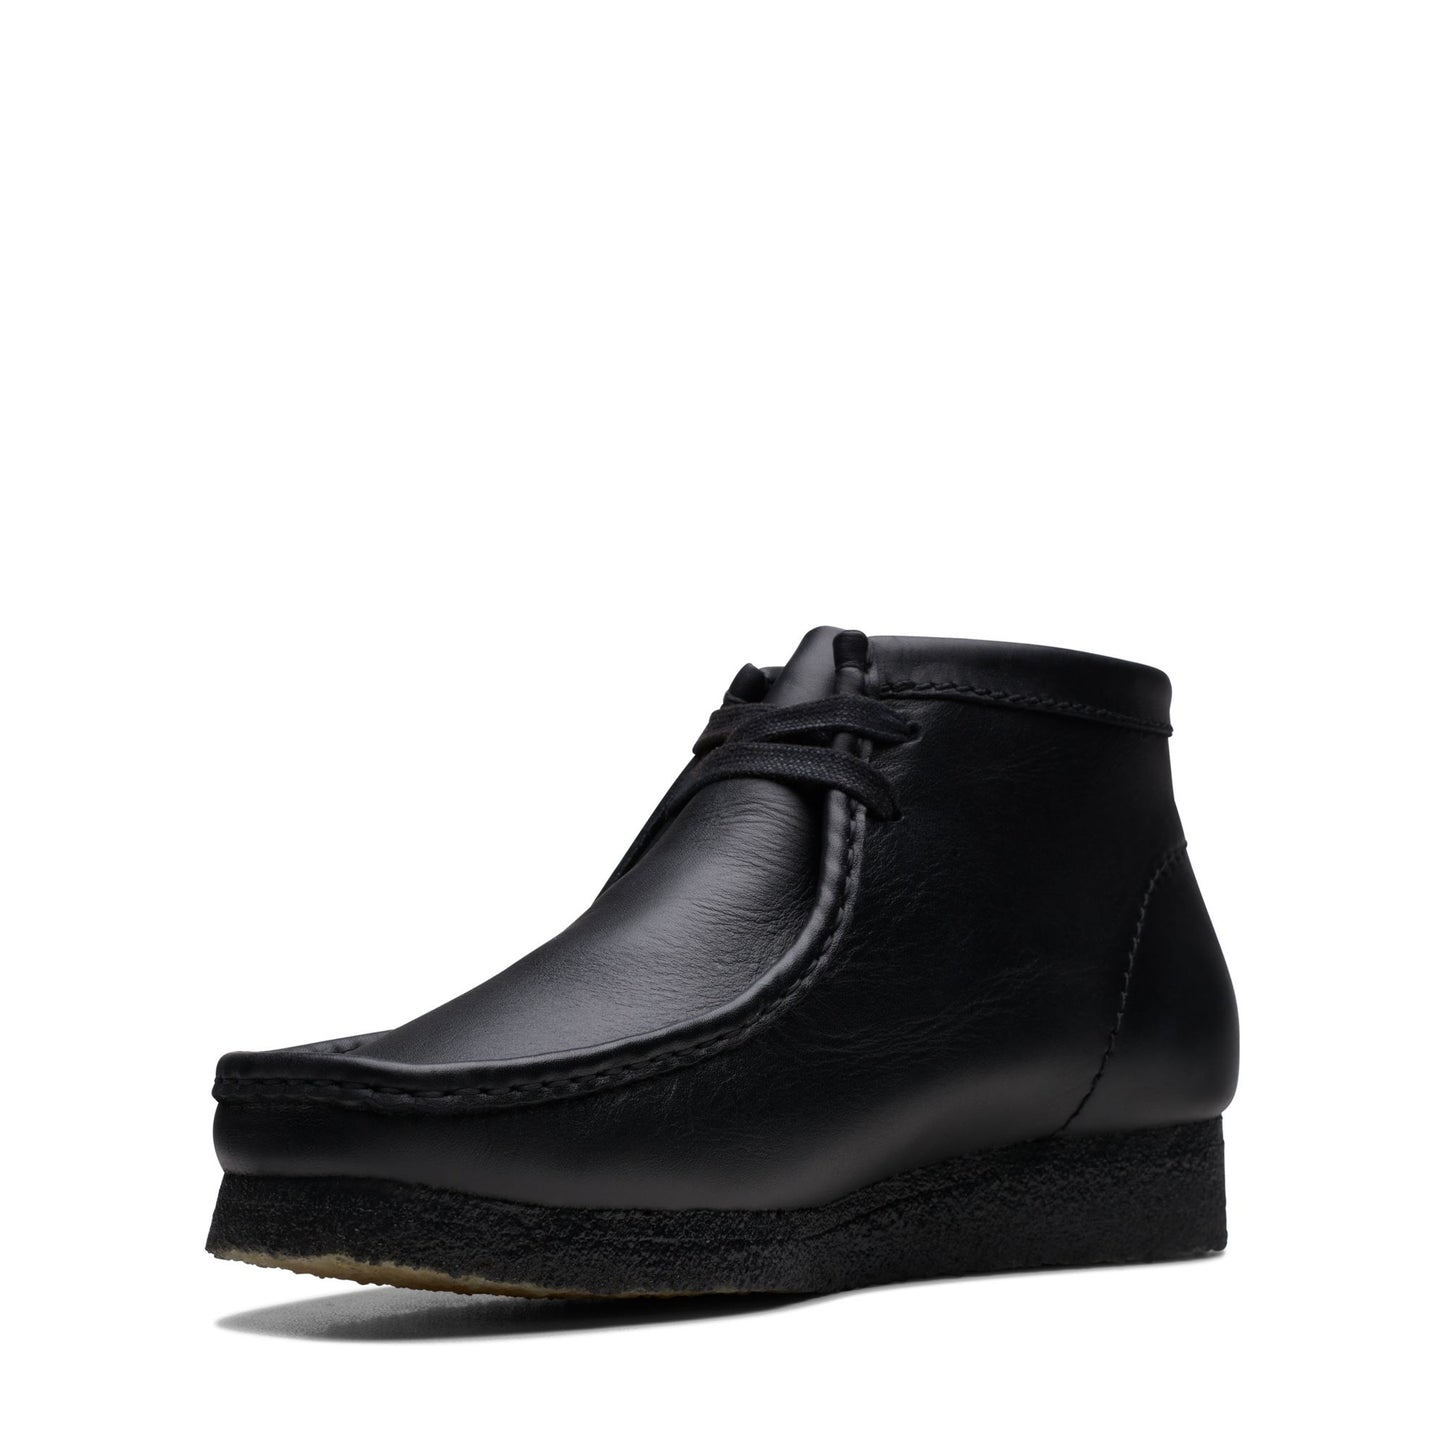 CLARKS WALLABEE BOOT - BLACK LEATHER